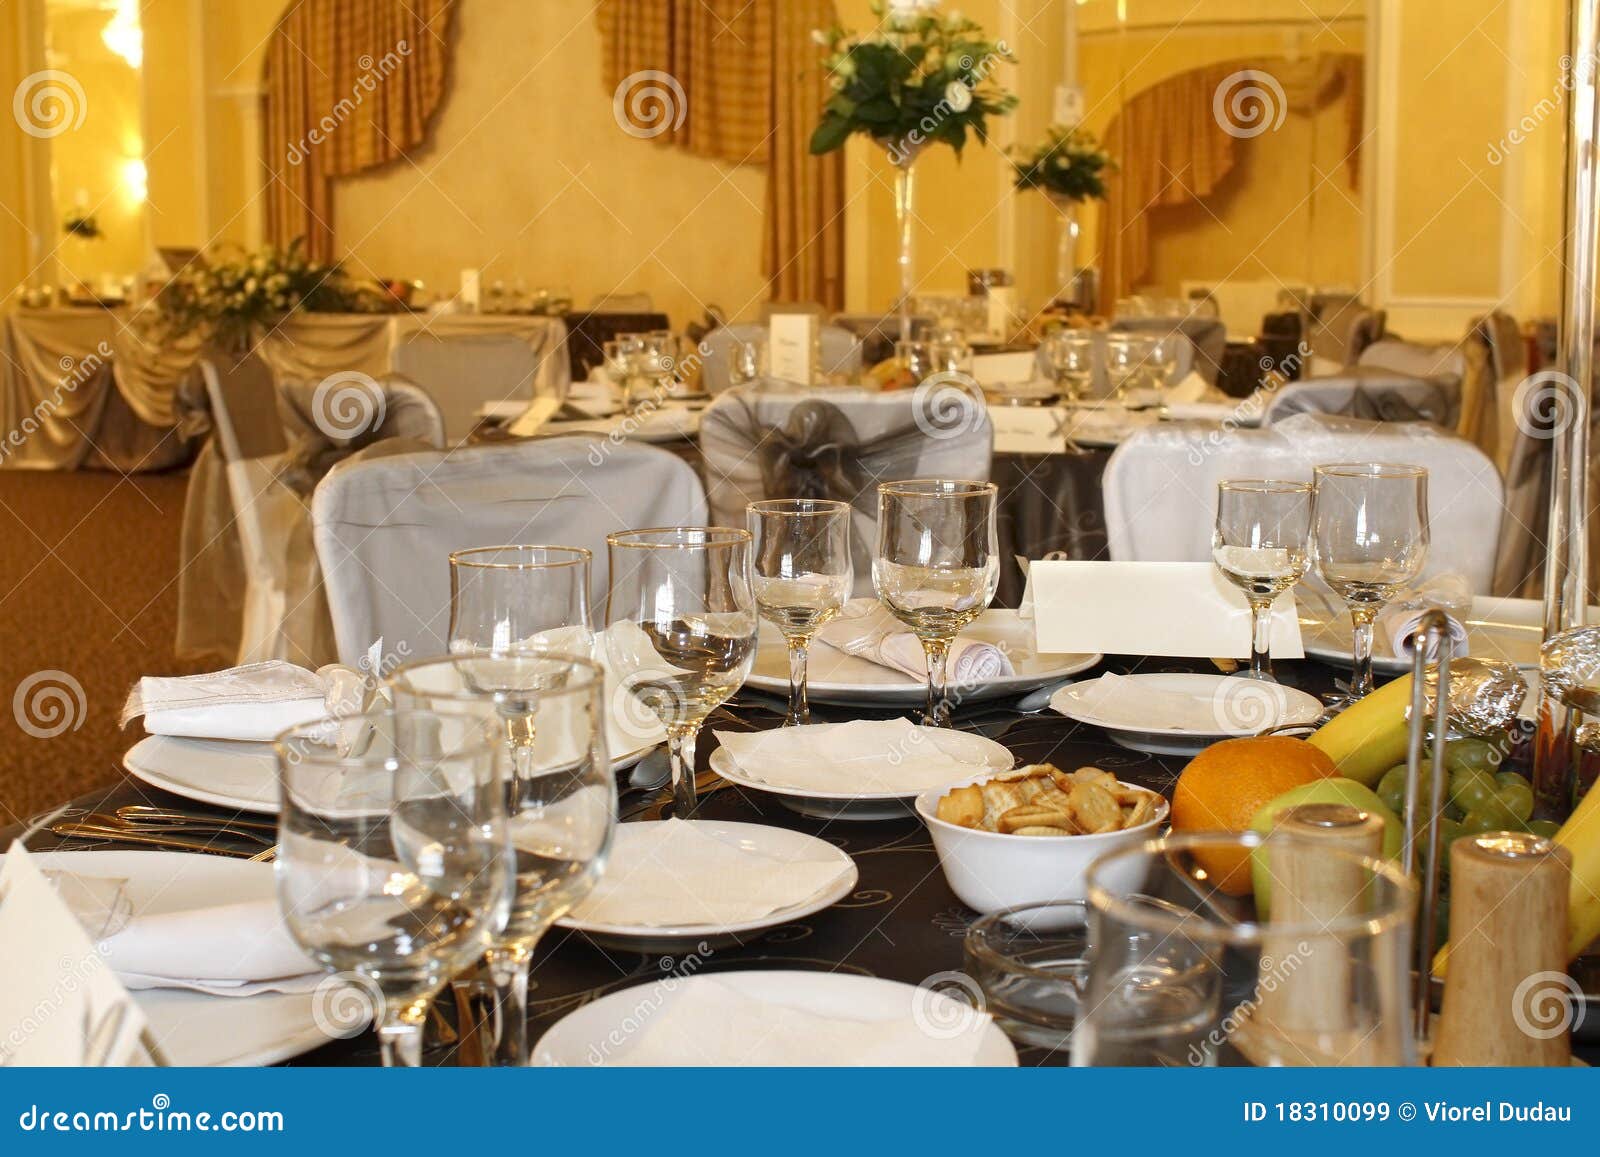  Party  Decorations  For Corporate Lunch  Royalty Free Stock 